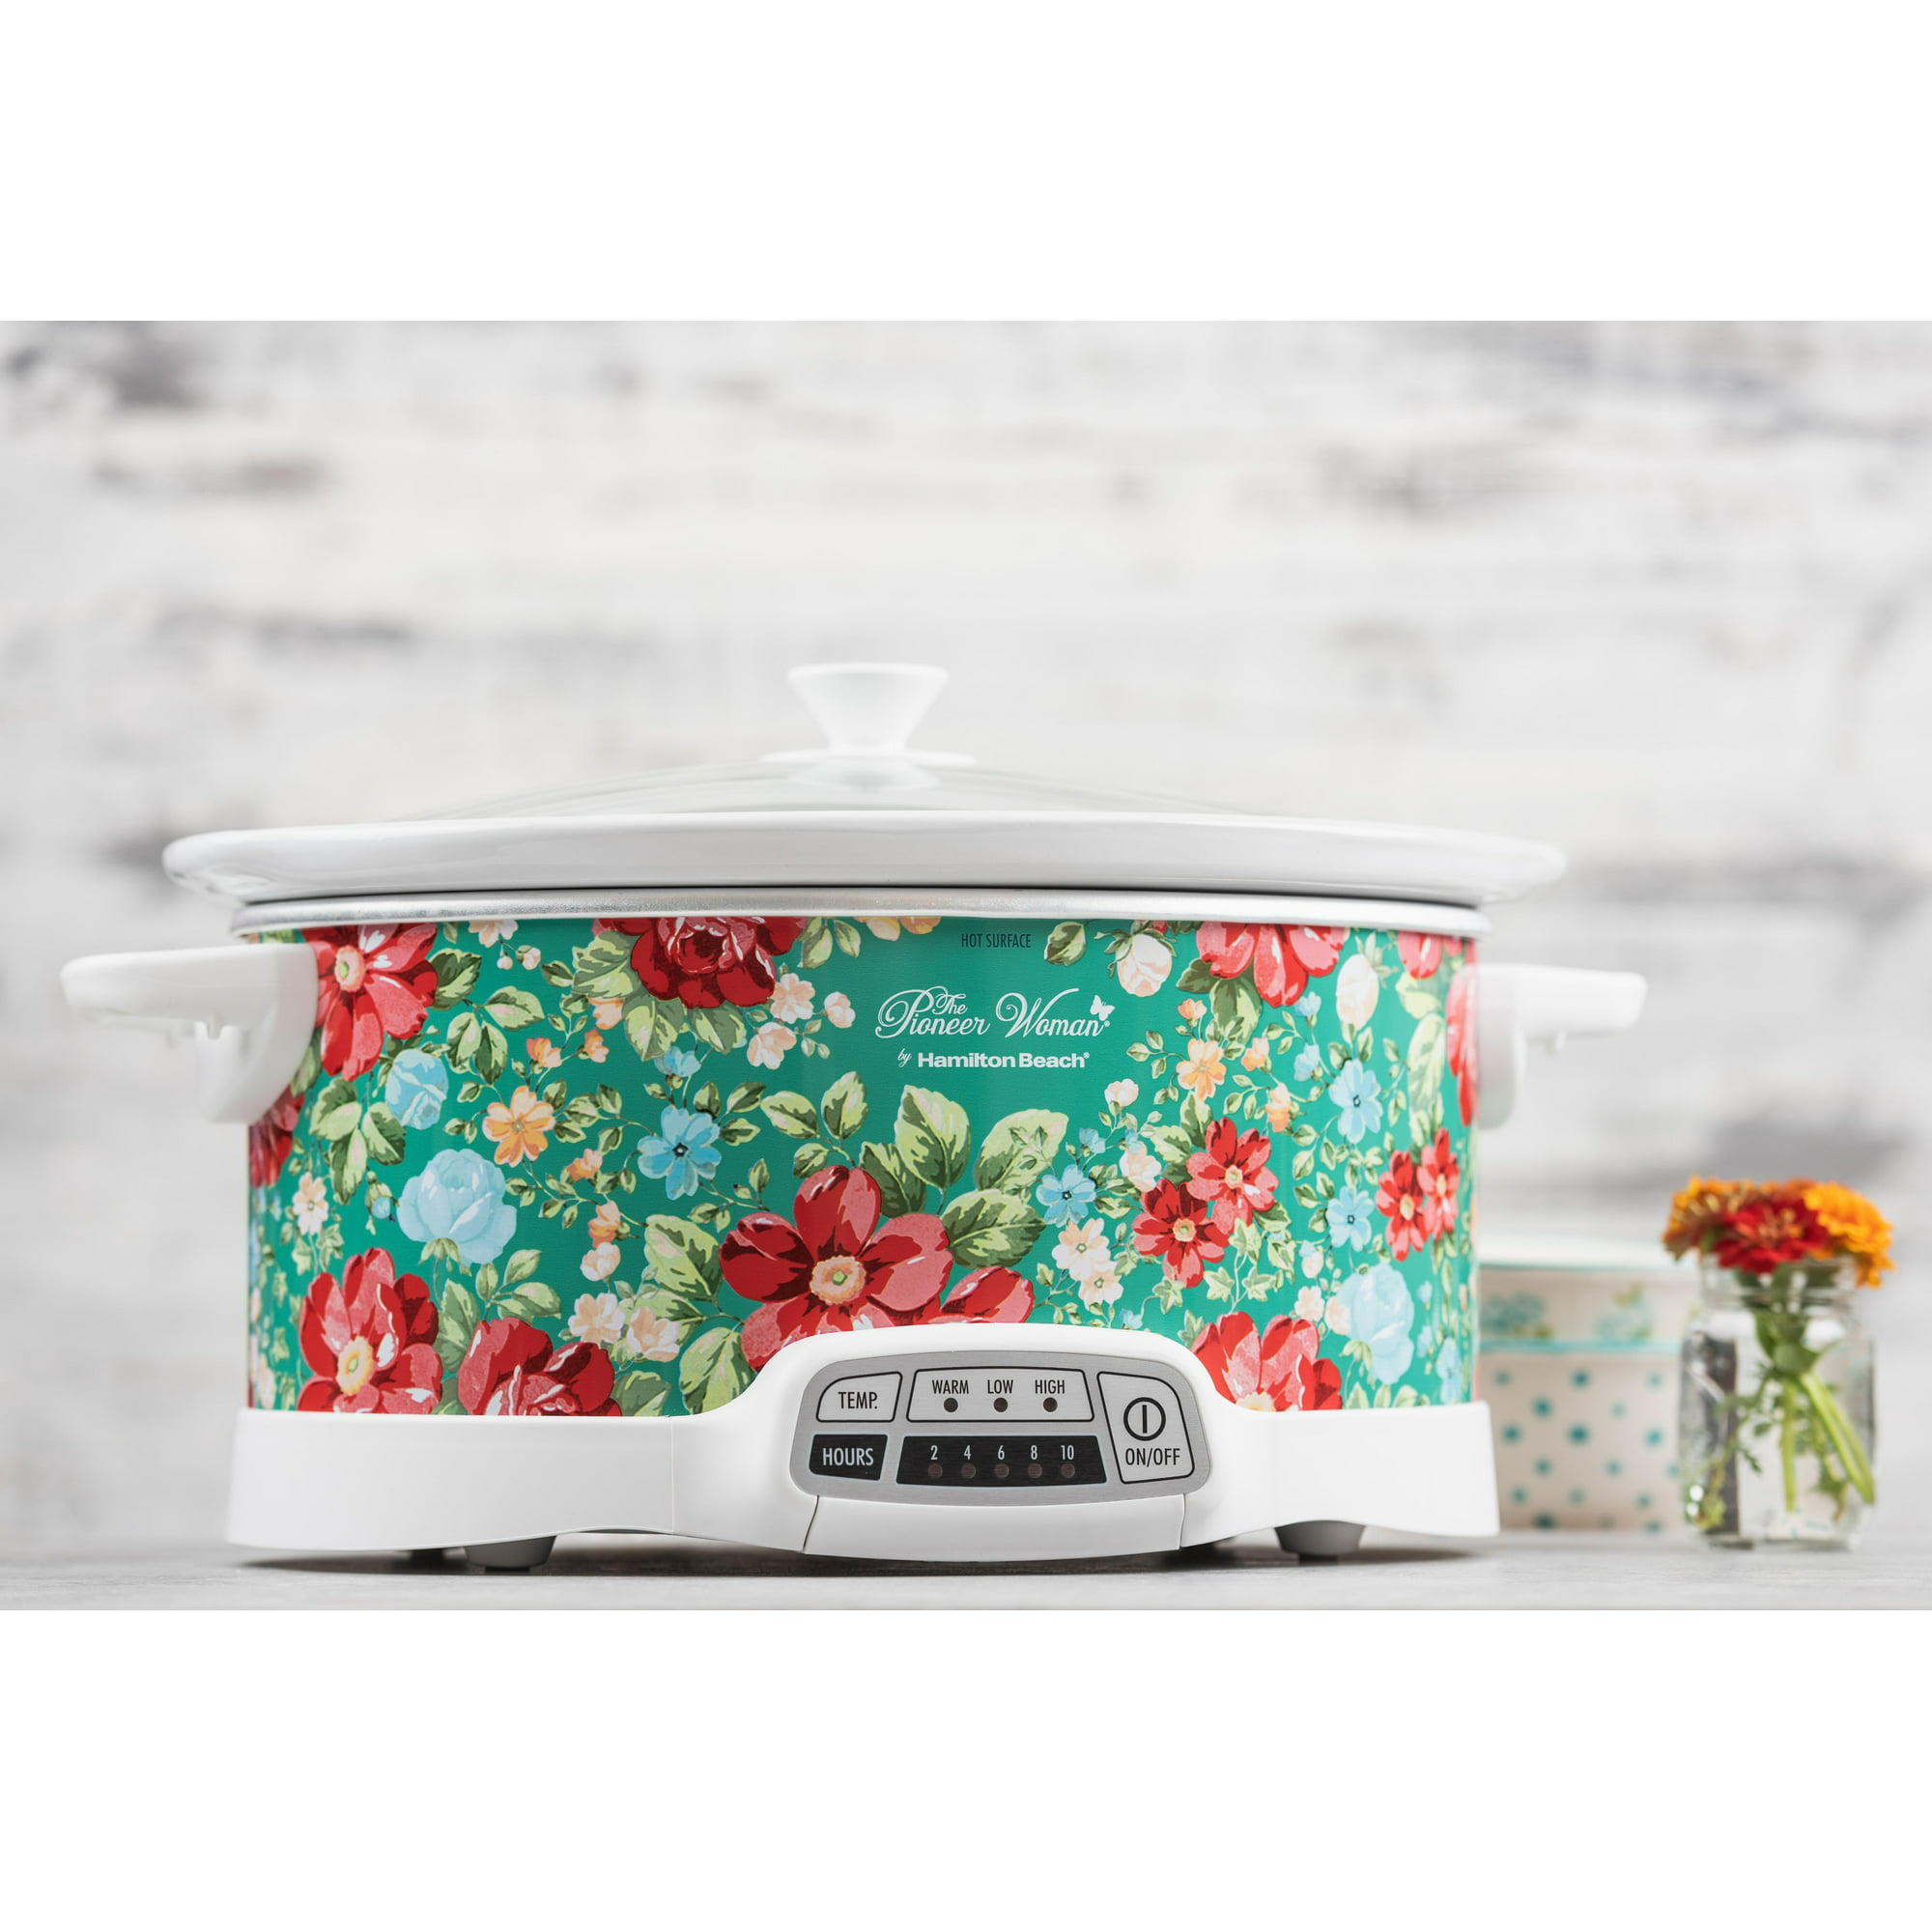 Ree Drummond Just Added 6 New Items To Her Walmart Cookware